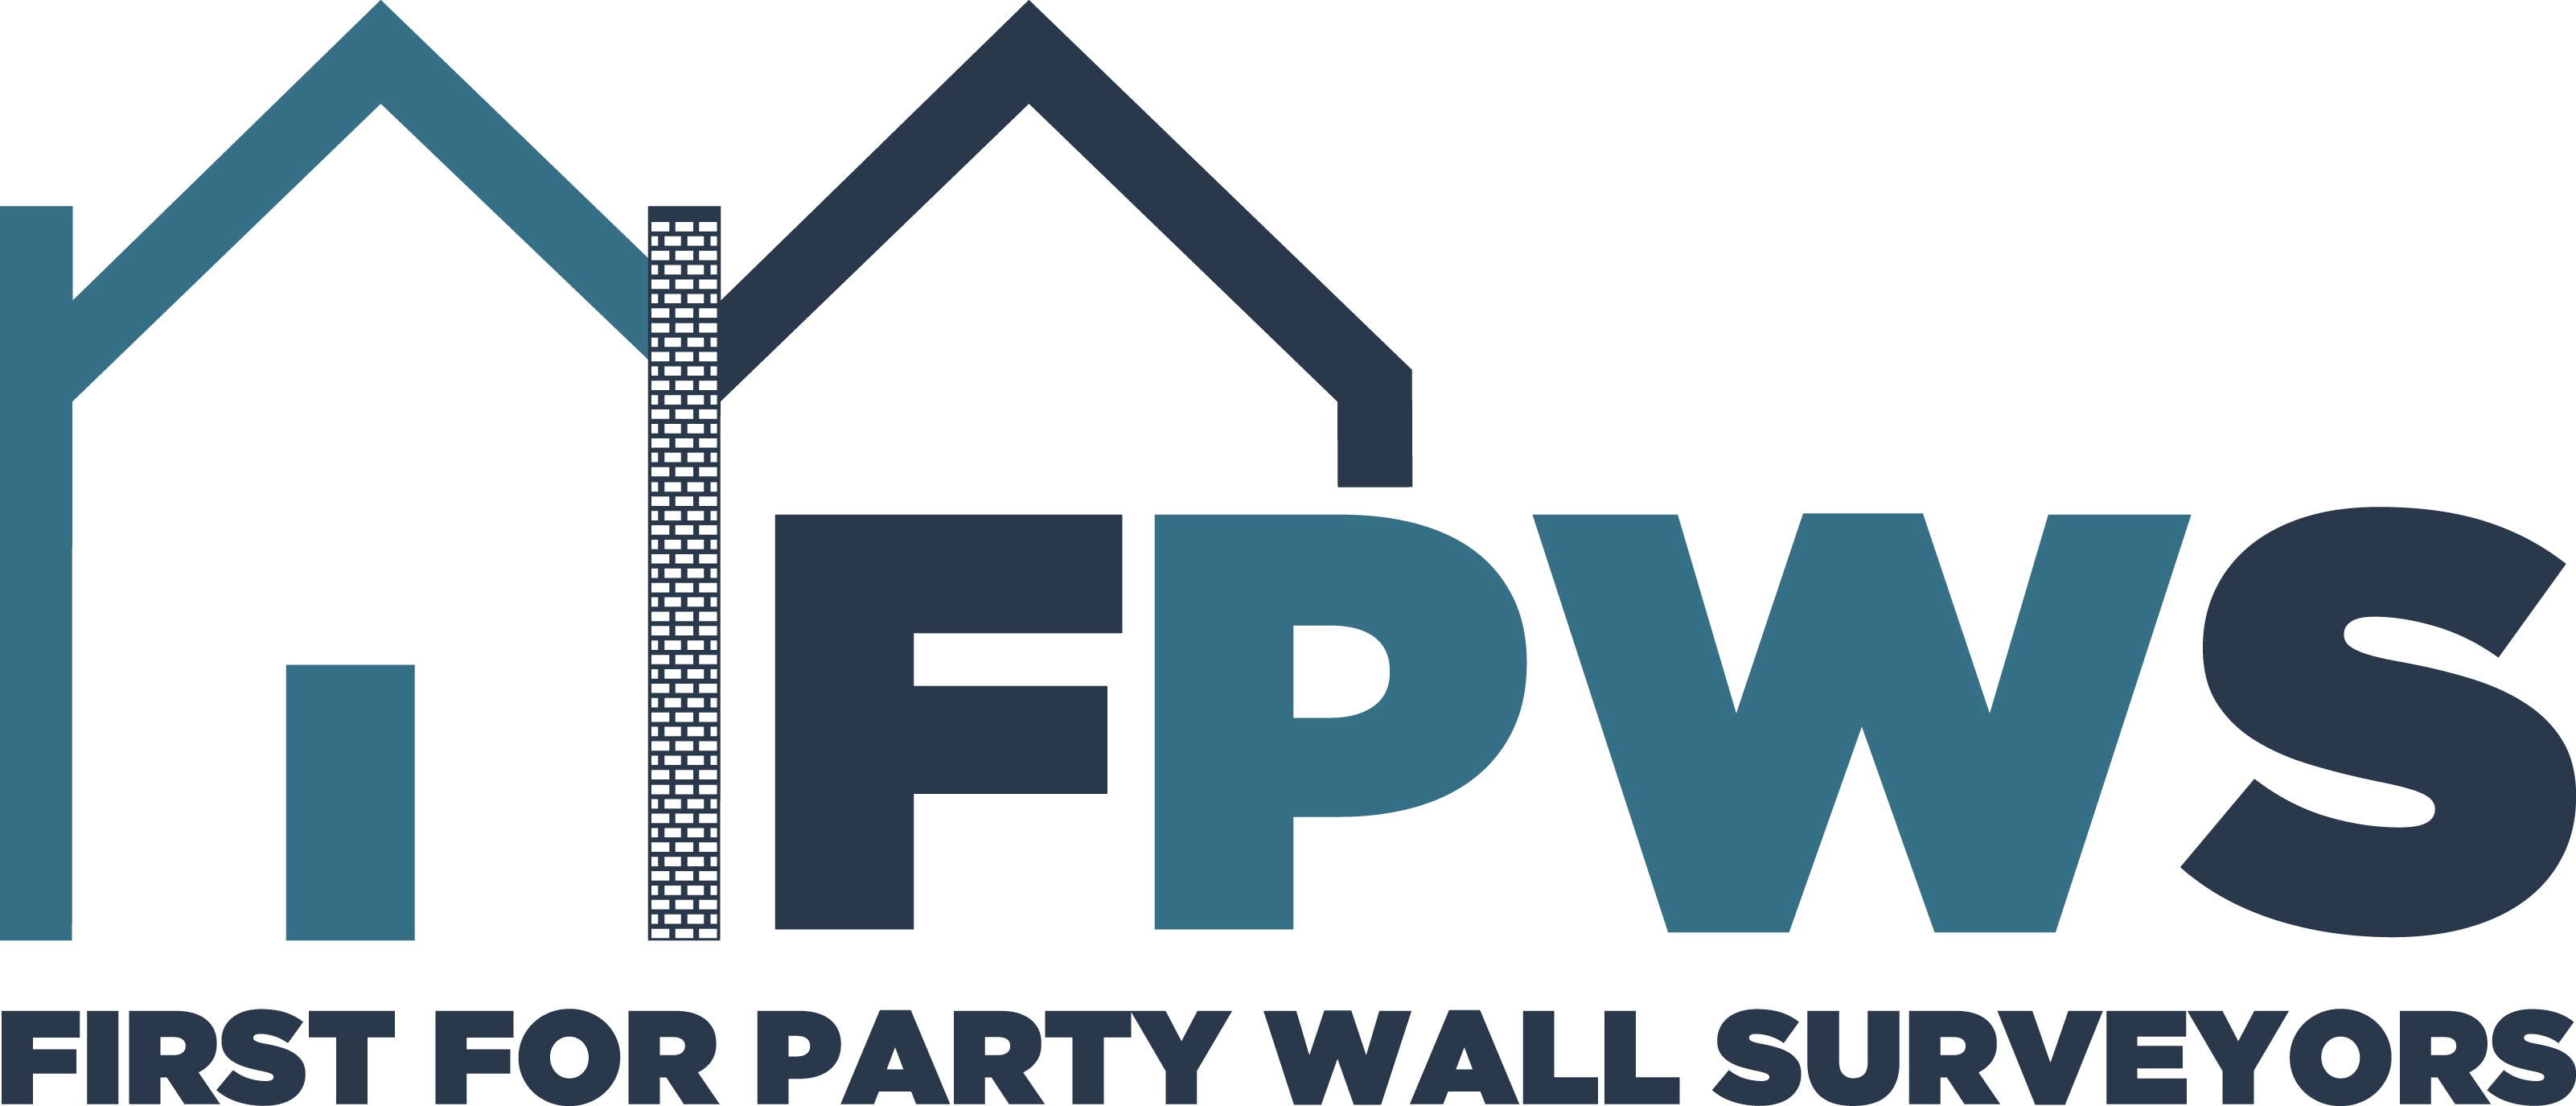 First for Party Wall Surveyors (East Midlands)